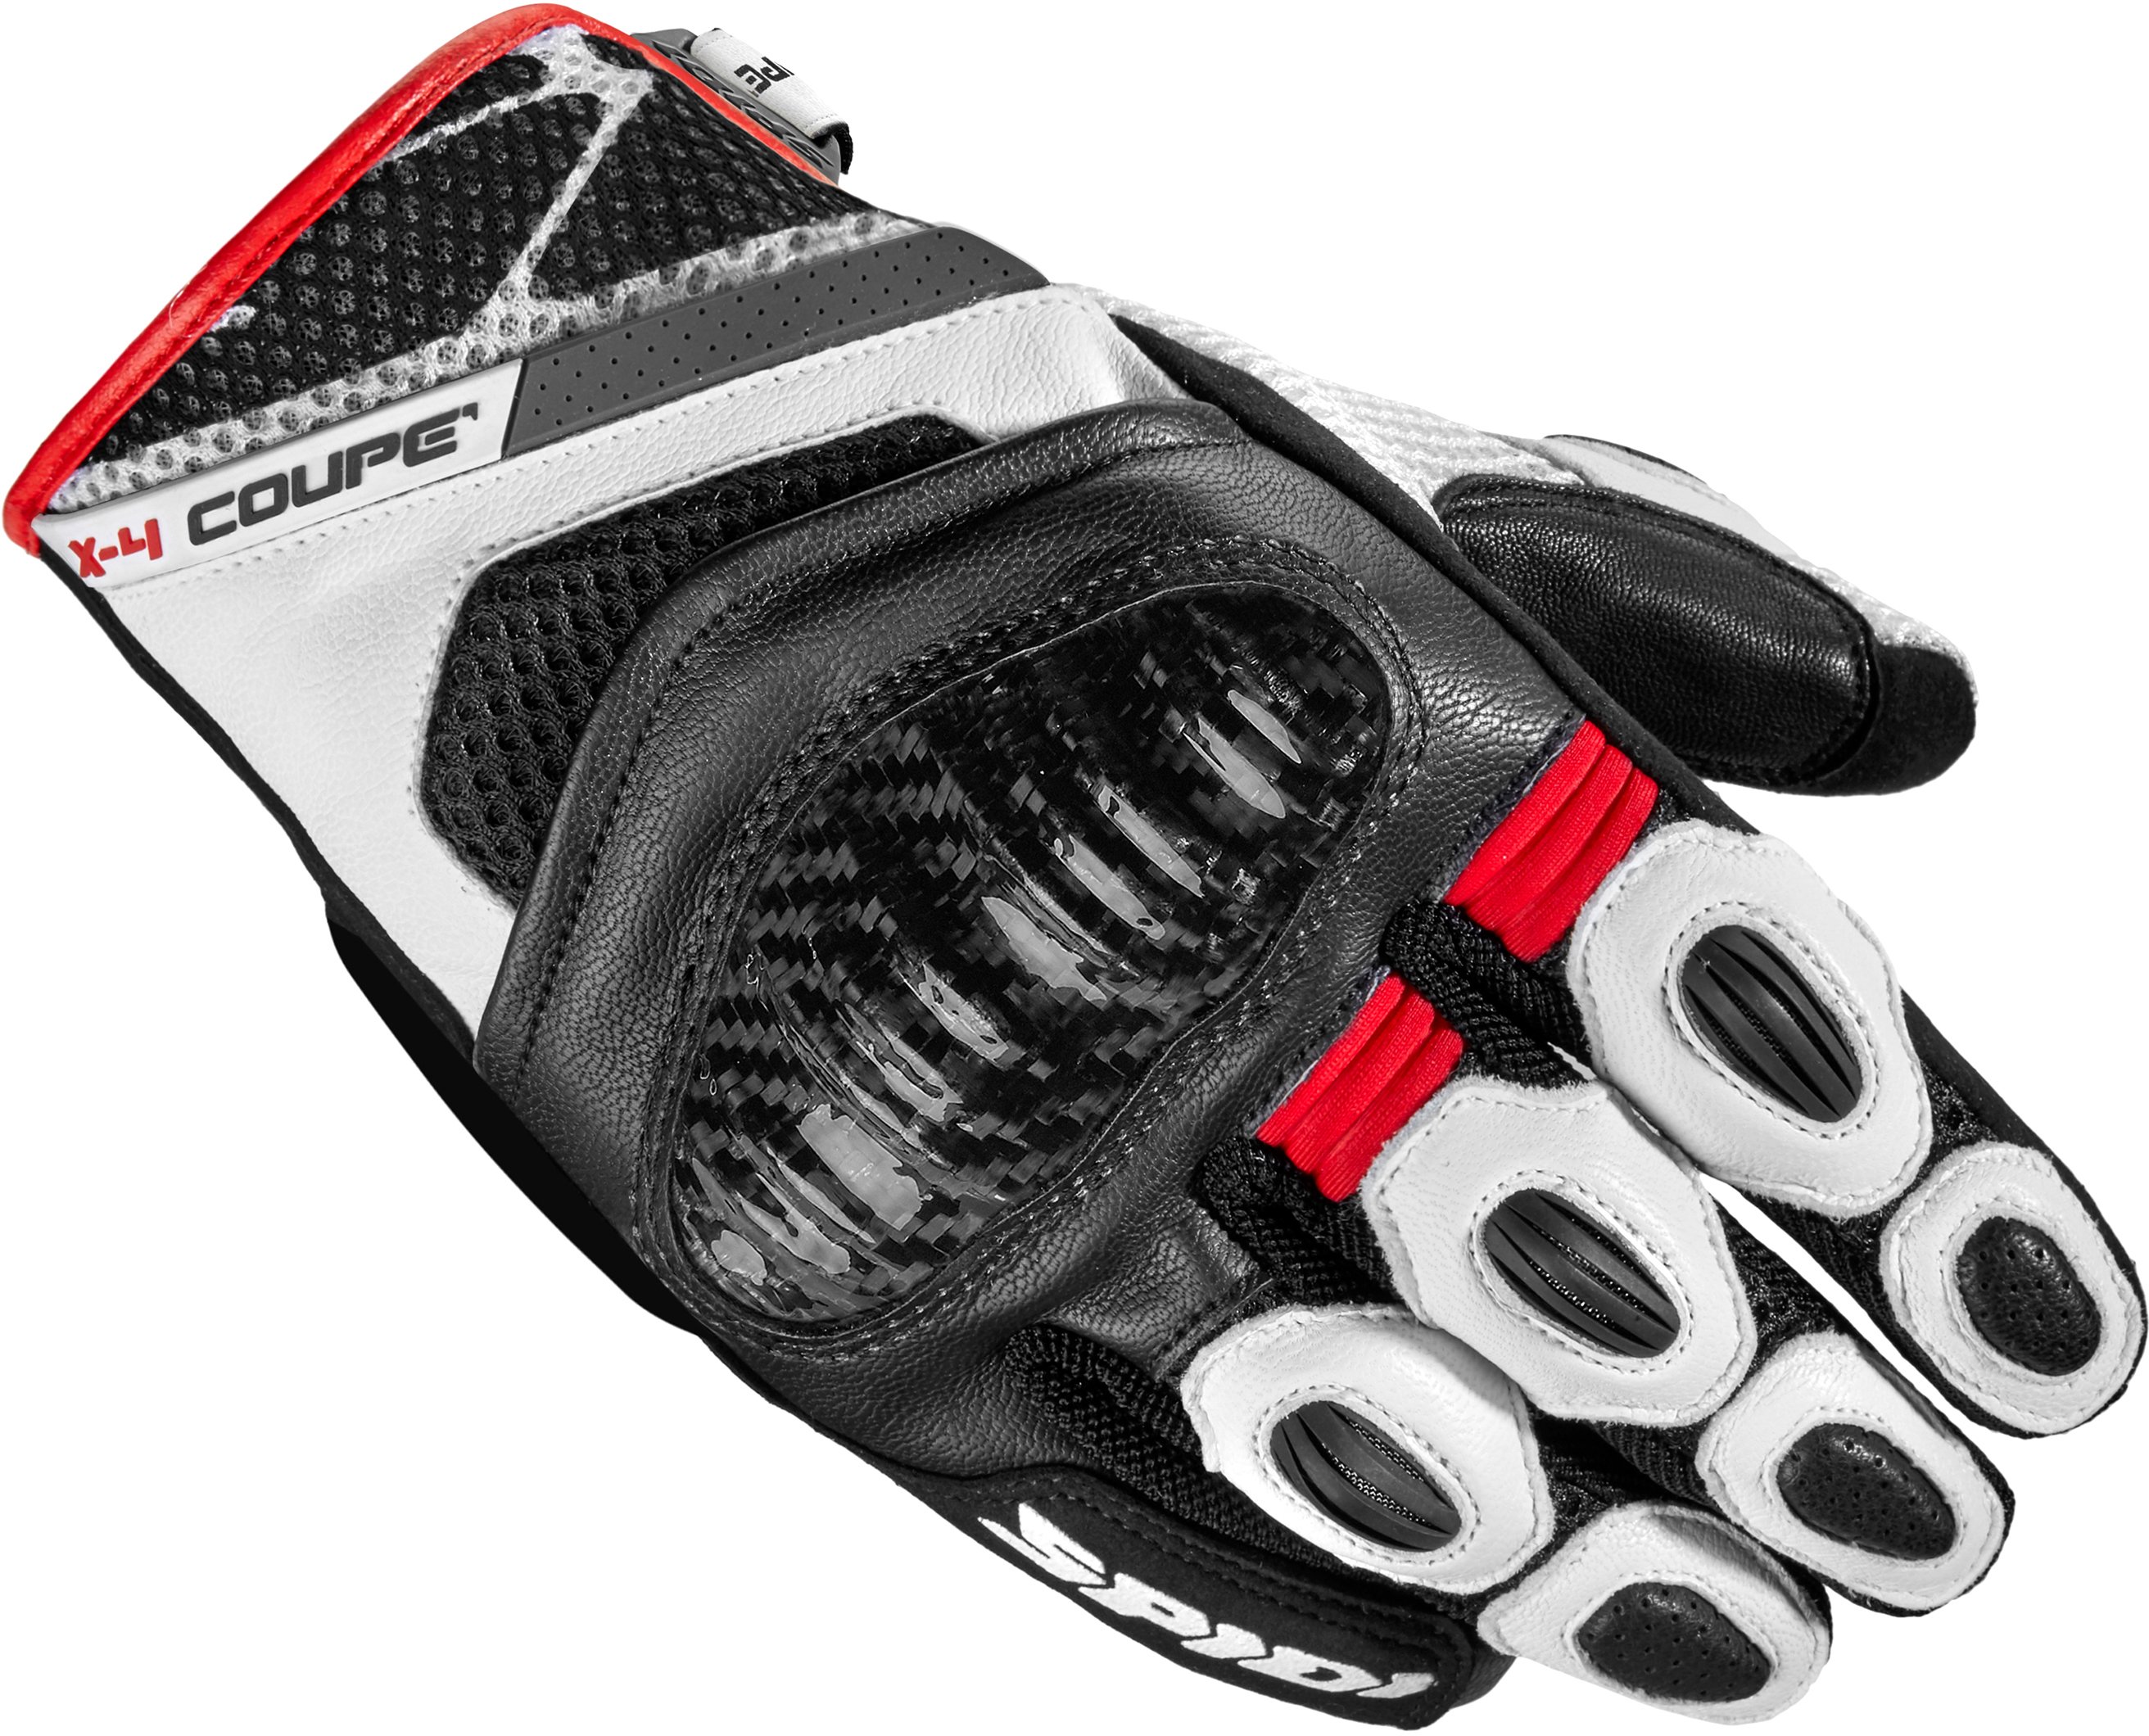 Image of Spidi X-4 Coupe Rot Handschuhe Größe 2XL